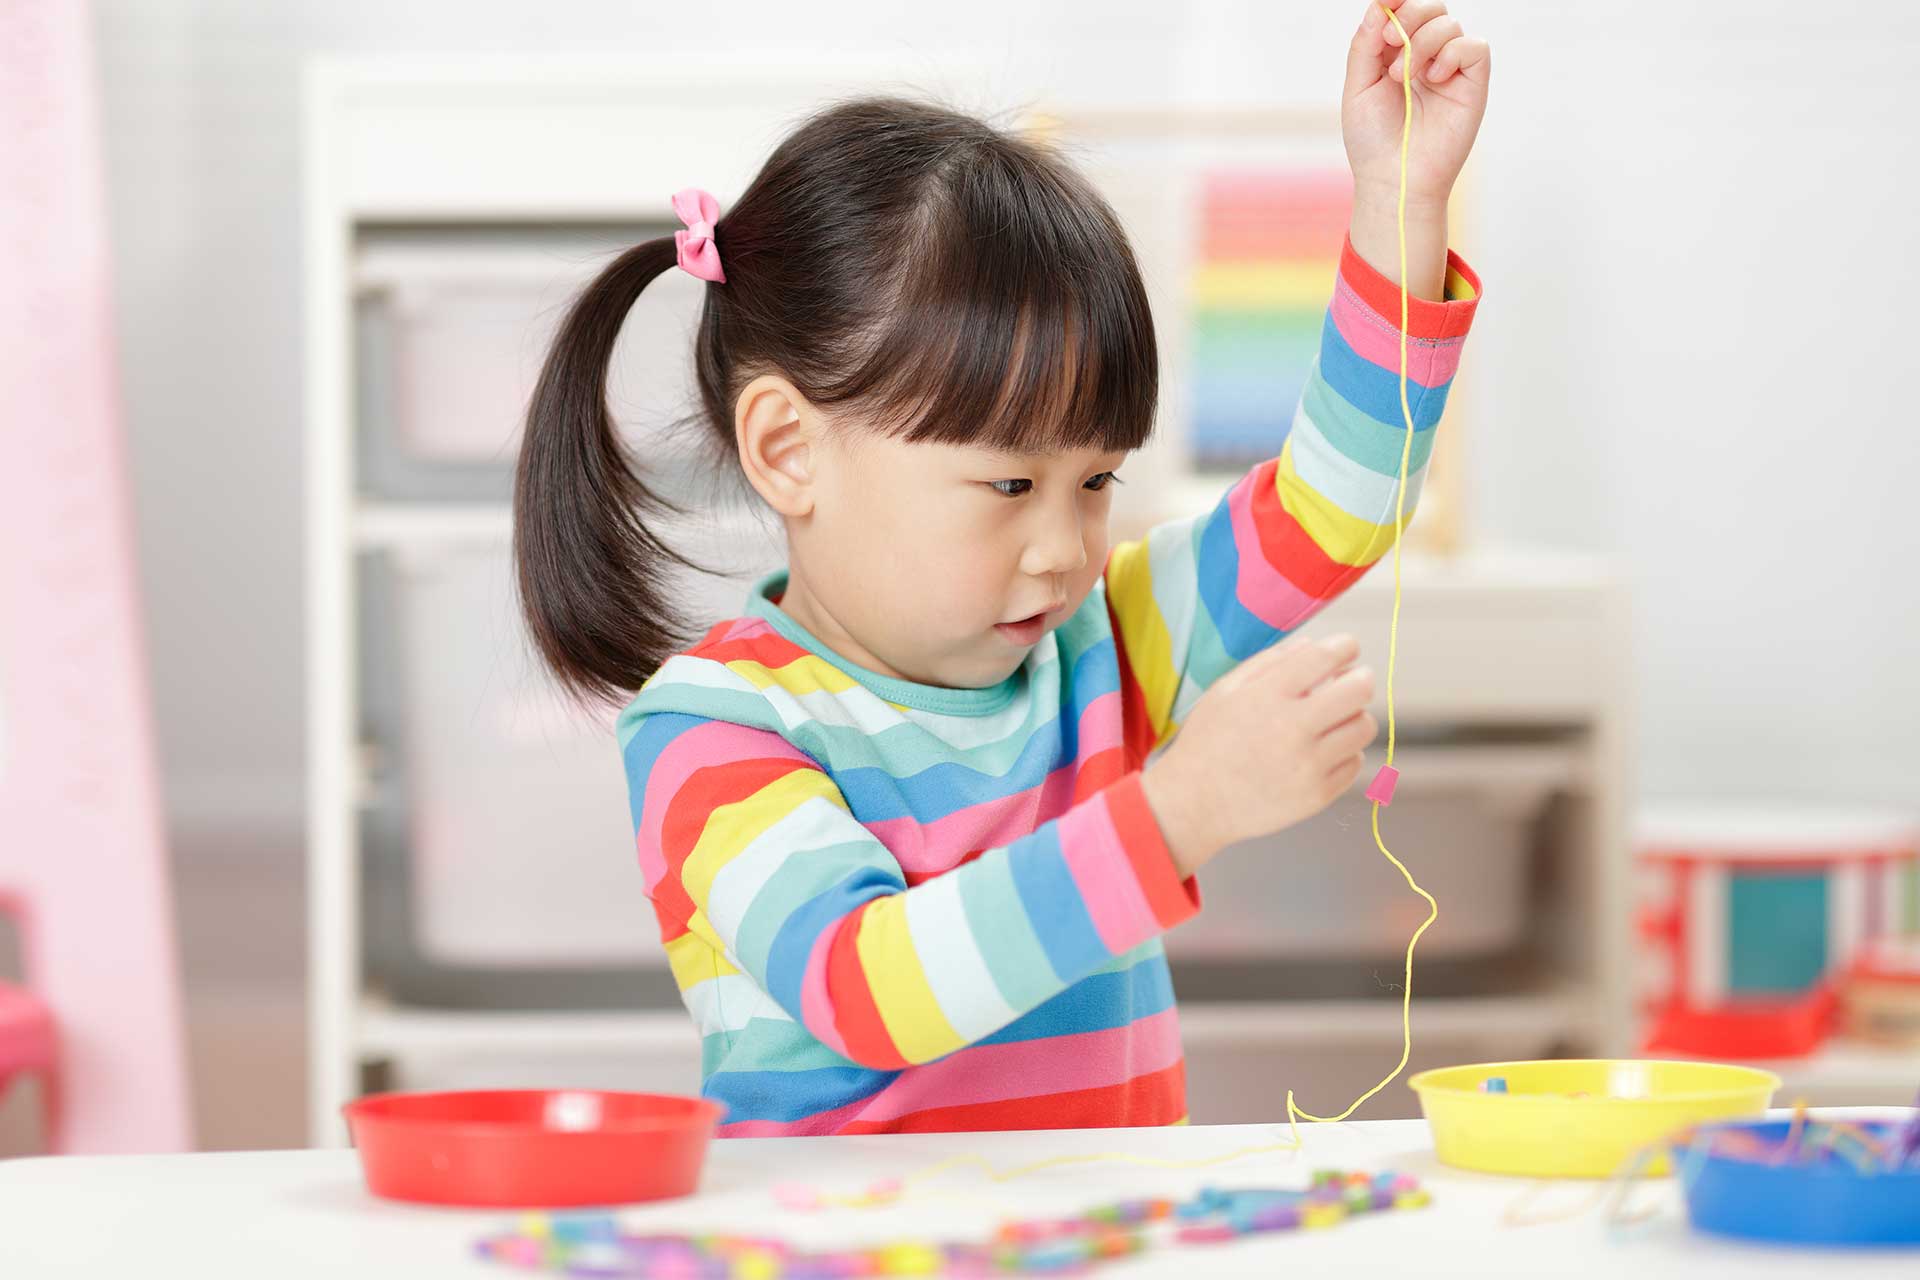 There are two main interview methods for beads. One is the "bead wearing" format. Children need to thread beads into a rope. This mainly tests children's hand-eye coordination, wrist flexibility, and concentration.